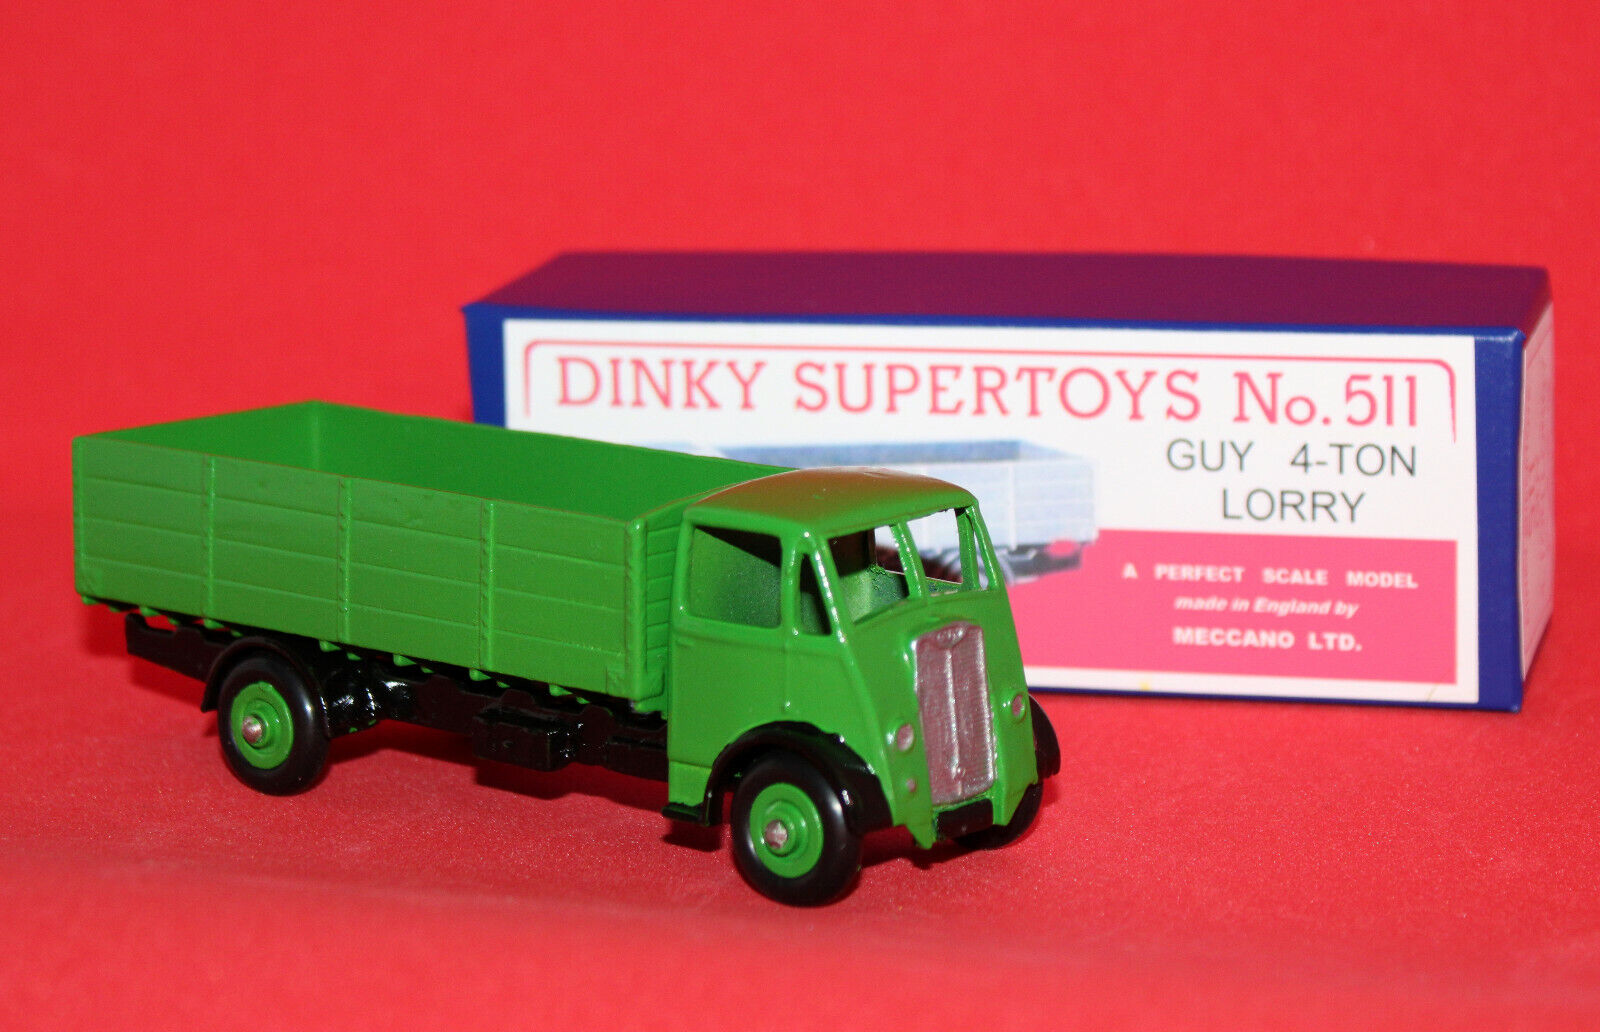 DINKY TOYS 511 Guy 4-Ton Lorry RESTORED/REPAINTED + Repro box b